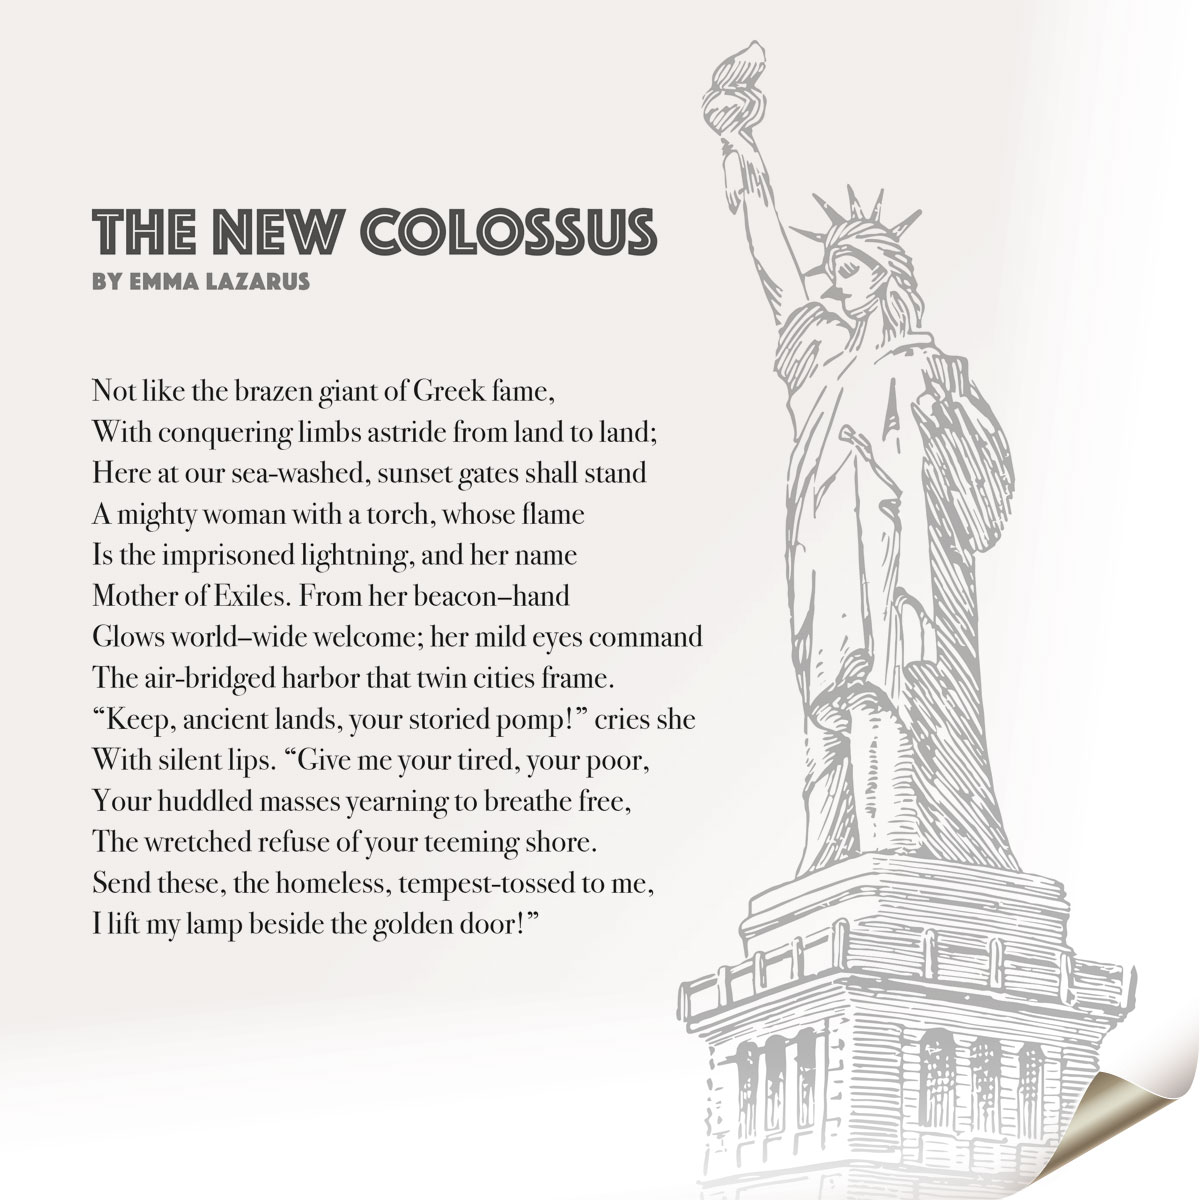 paraphrasing and summarizing the new colossus